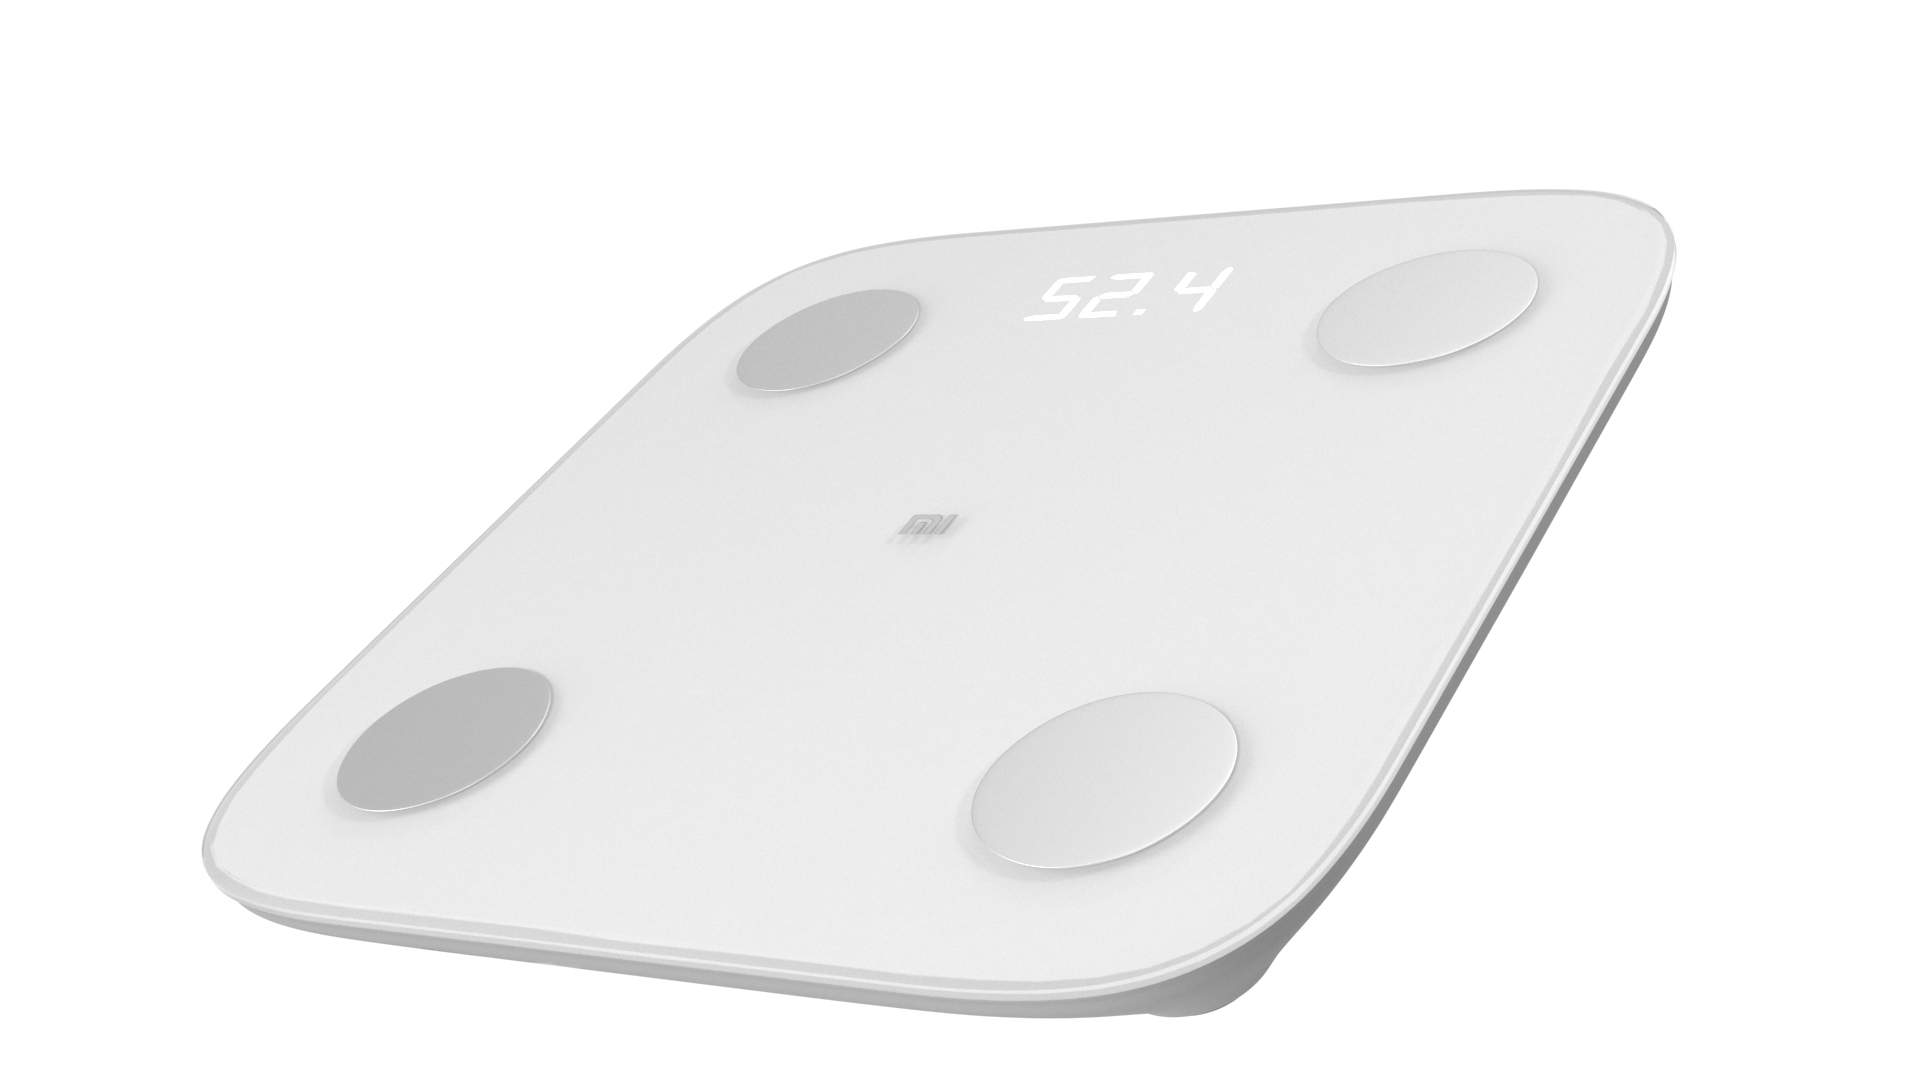 XIAOMI MI Body Composition Scale 2 - White, AYOUB COMPUTERS